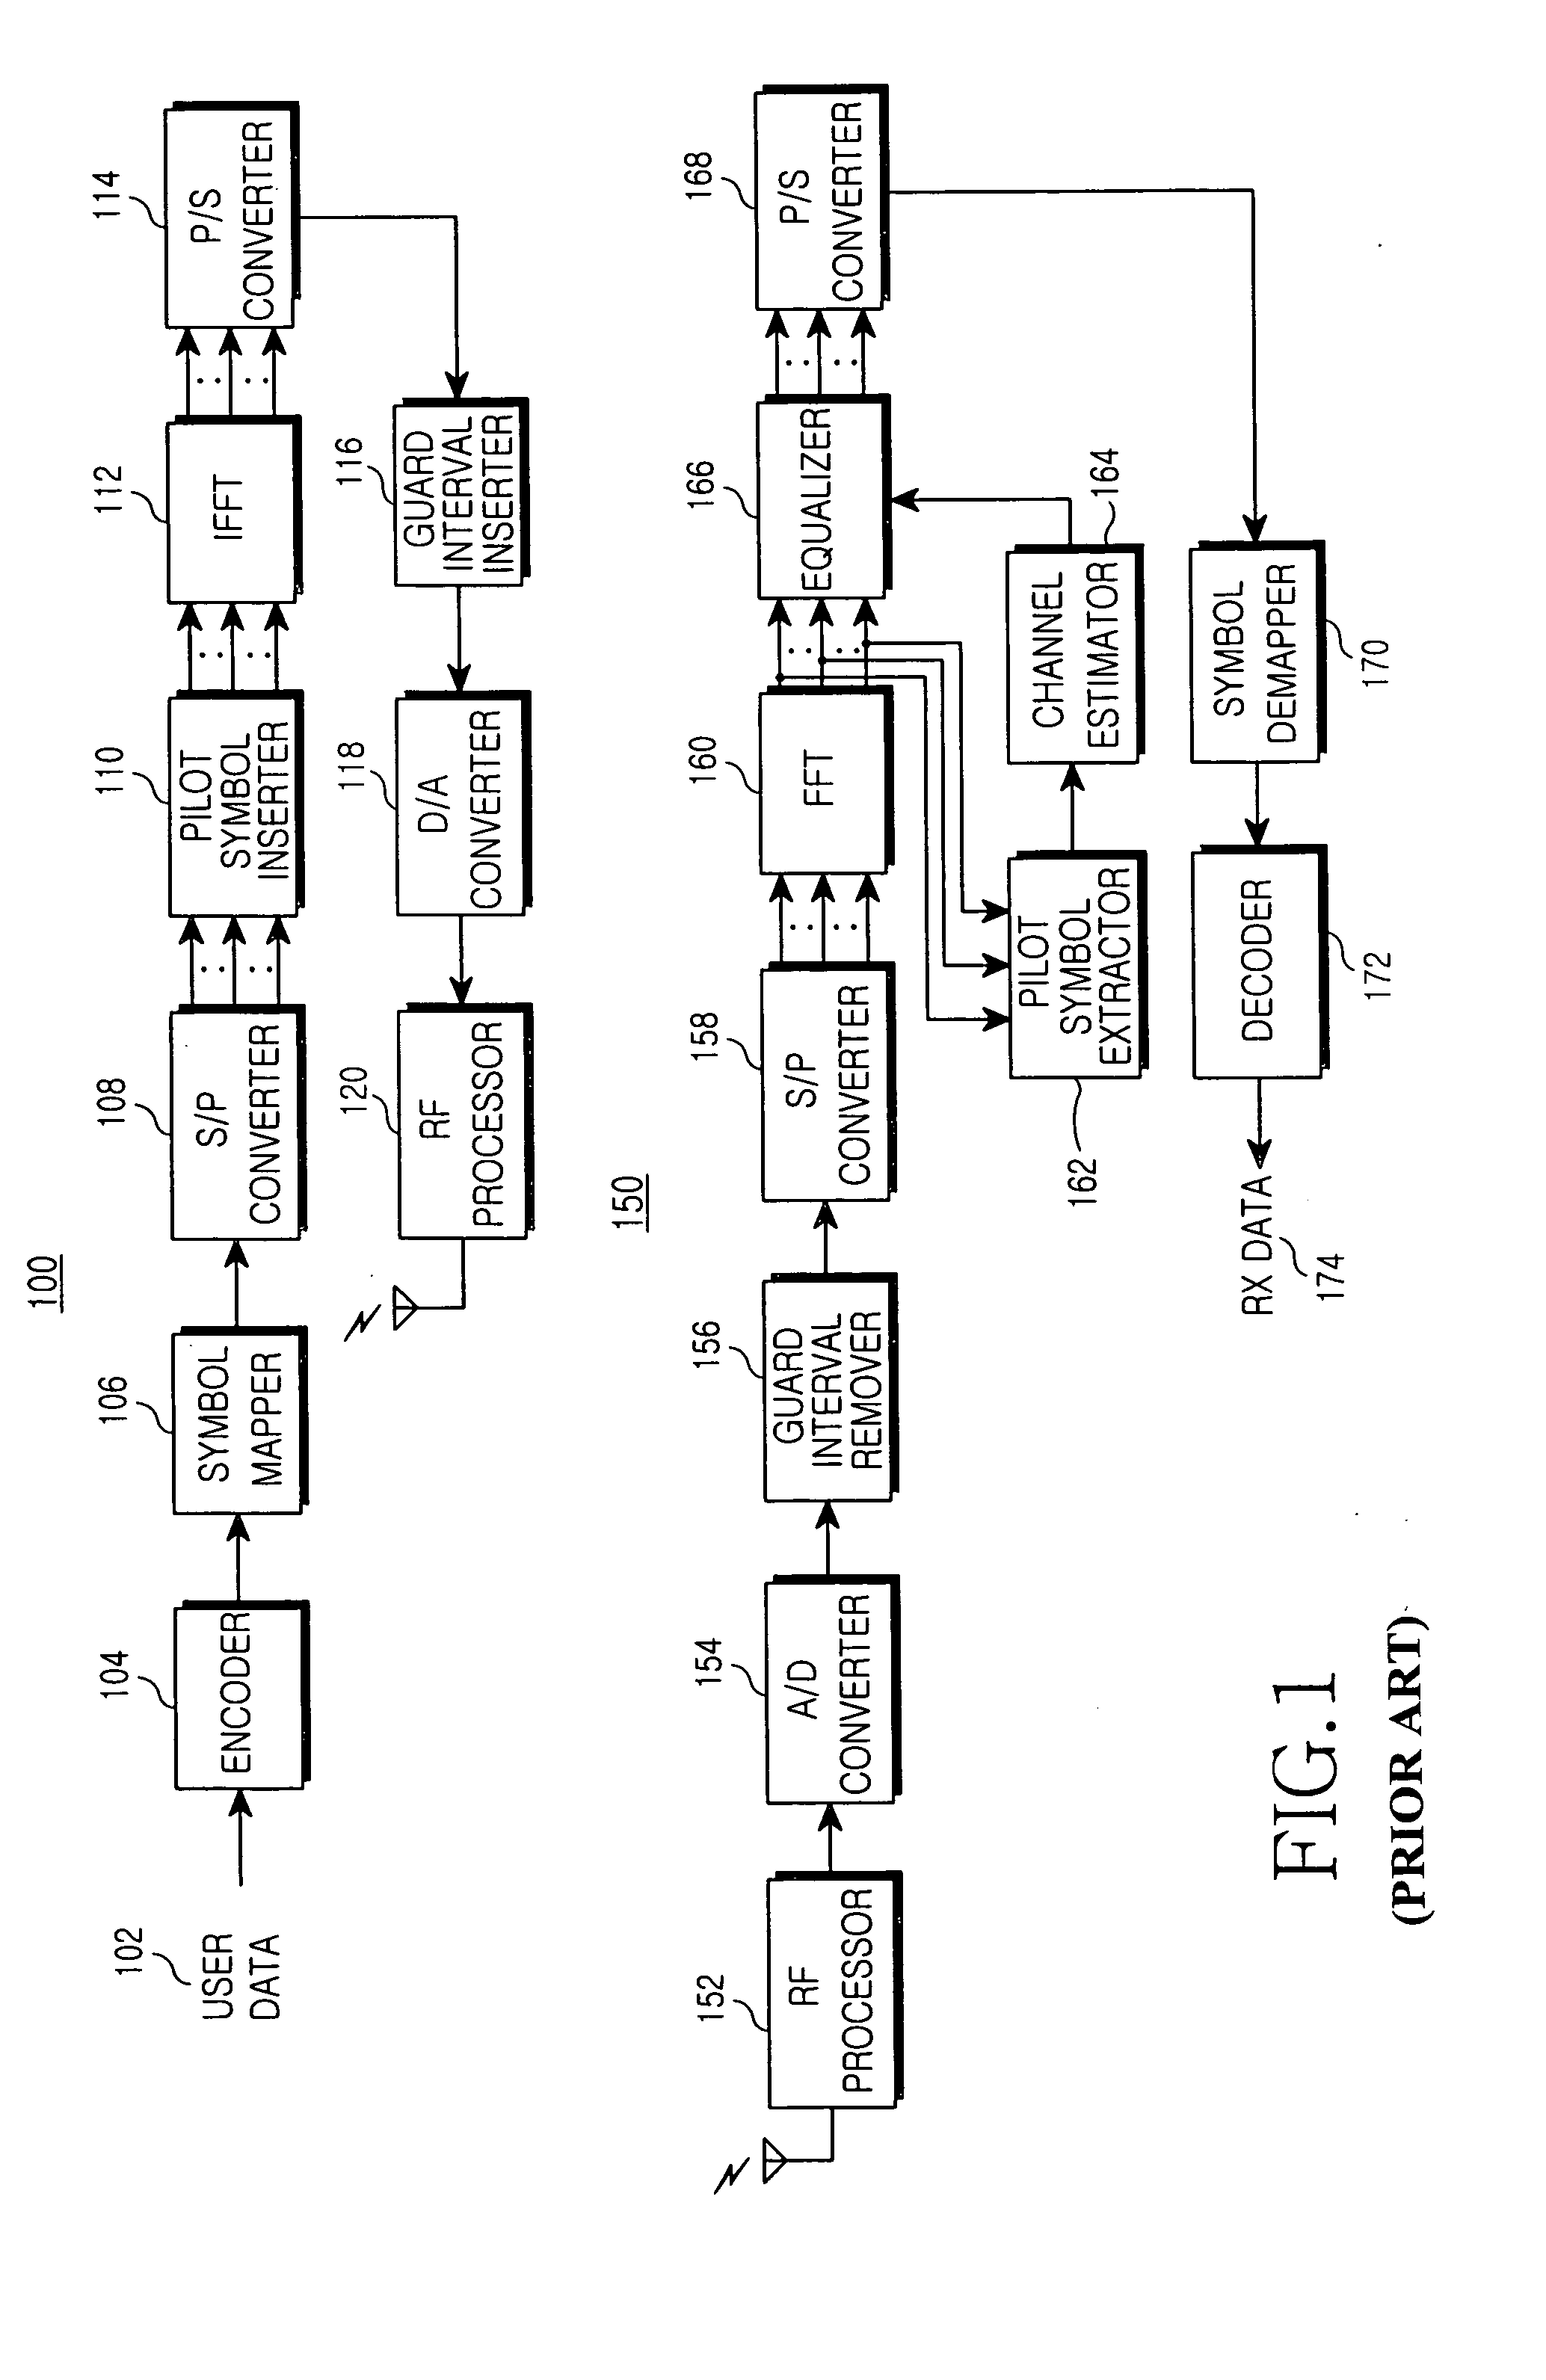 Channel estimation apparatus and method for adaptive channel allocation in an orthogonal frequency division multiple access system